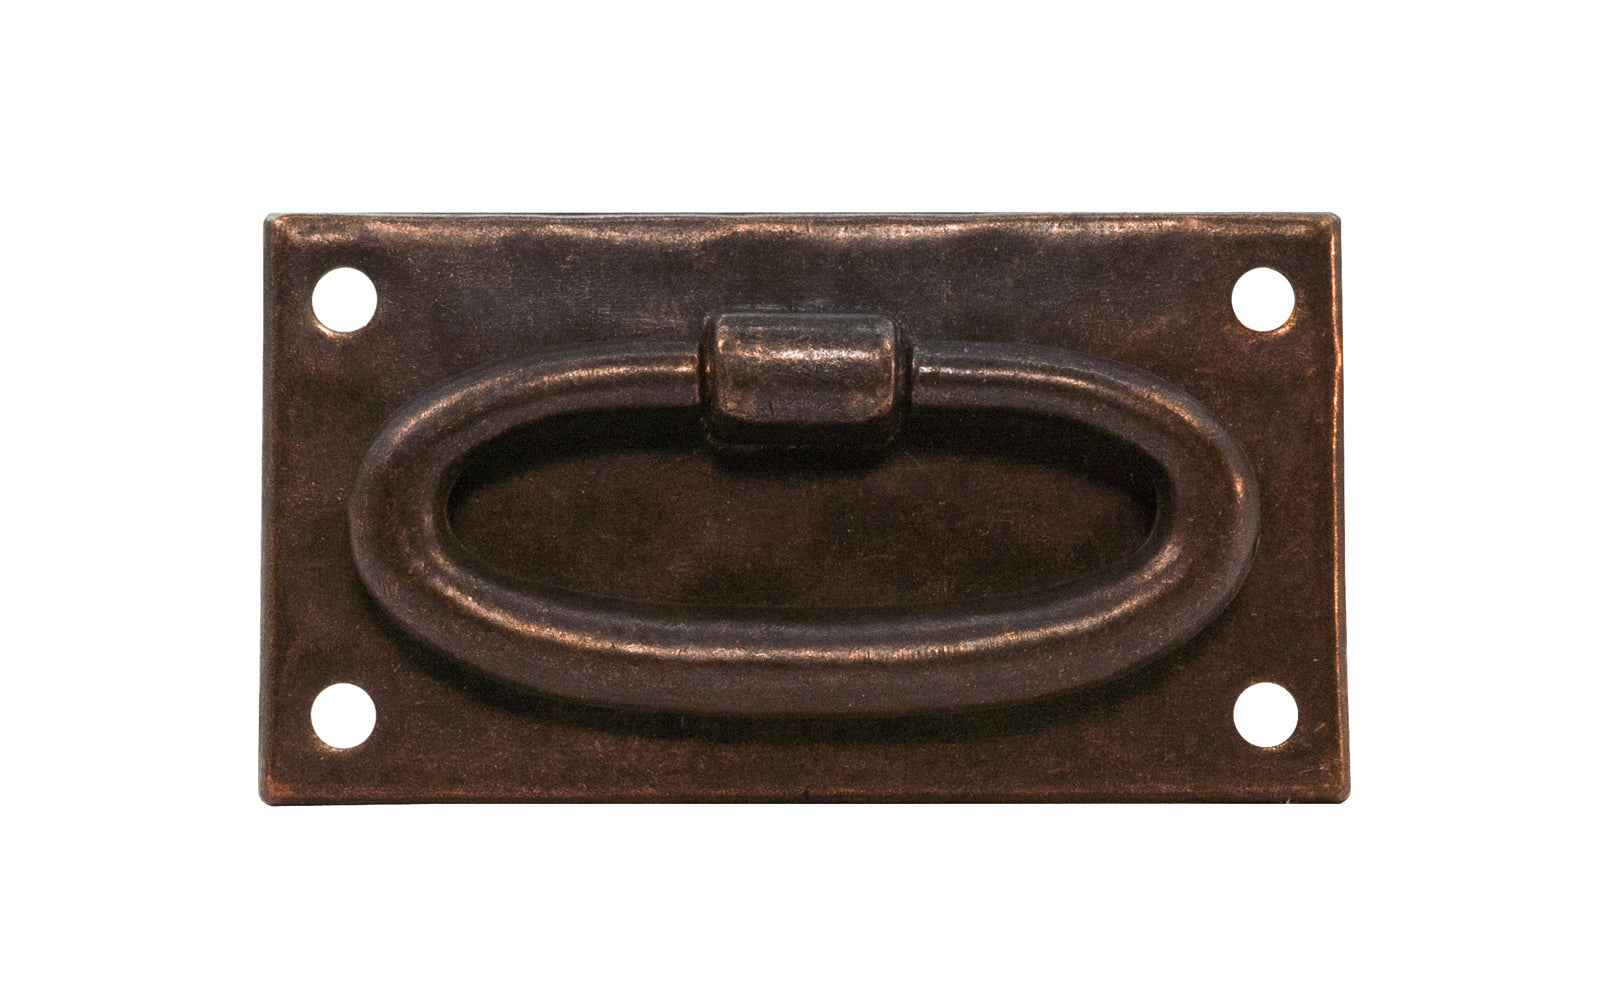 Vintage-style Hardware · Solid Brass Hammered Oval Ring Drop Pull. Designed in the Mission or Arts & Crafts style, Gustav Stickley style hardware. Rustic hammered drop pull. Antique copper finish. Includes pyramid-head screws. Thick solid brass drop pull plate. 1-13/16" high x 3-3/8" wide plate. Reproduction hardware.